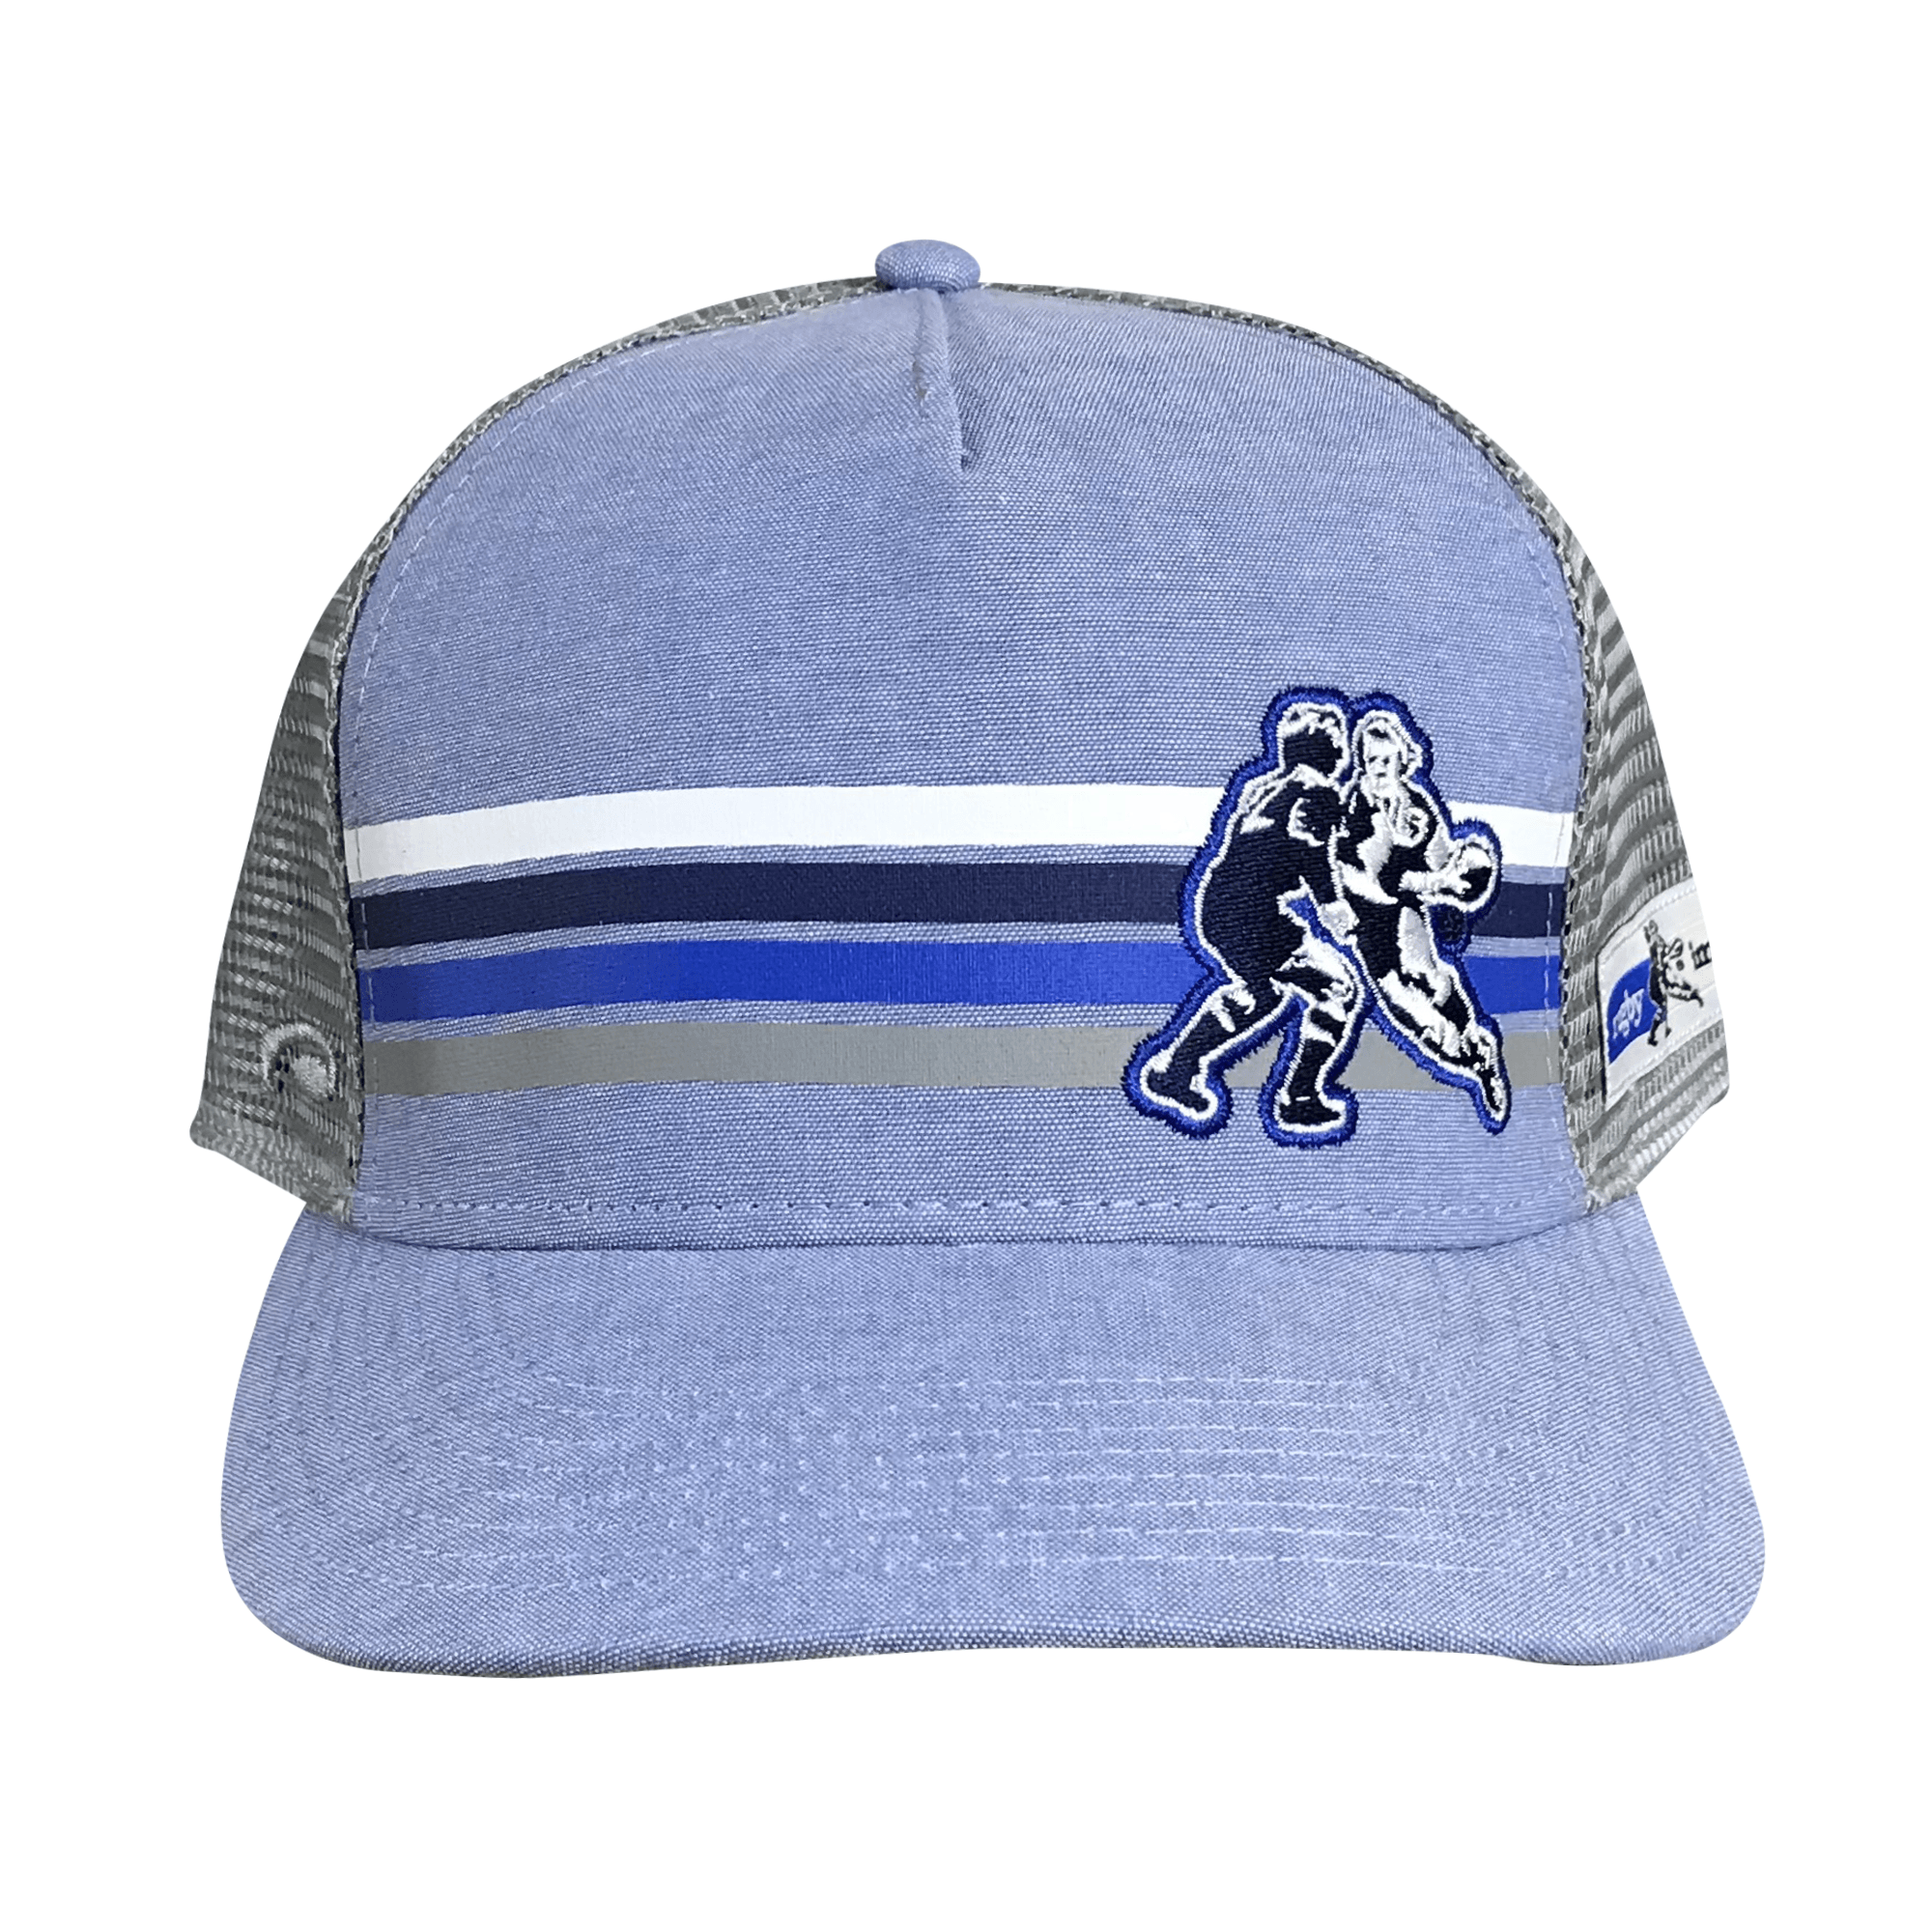 Rugby Imports Quad Stripe Trucker Hat